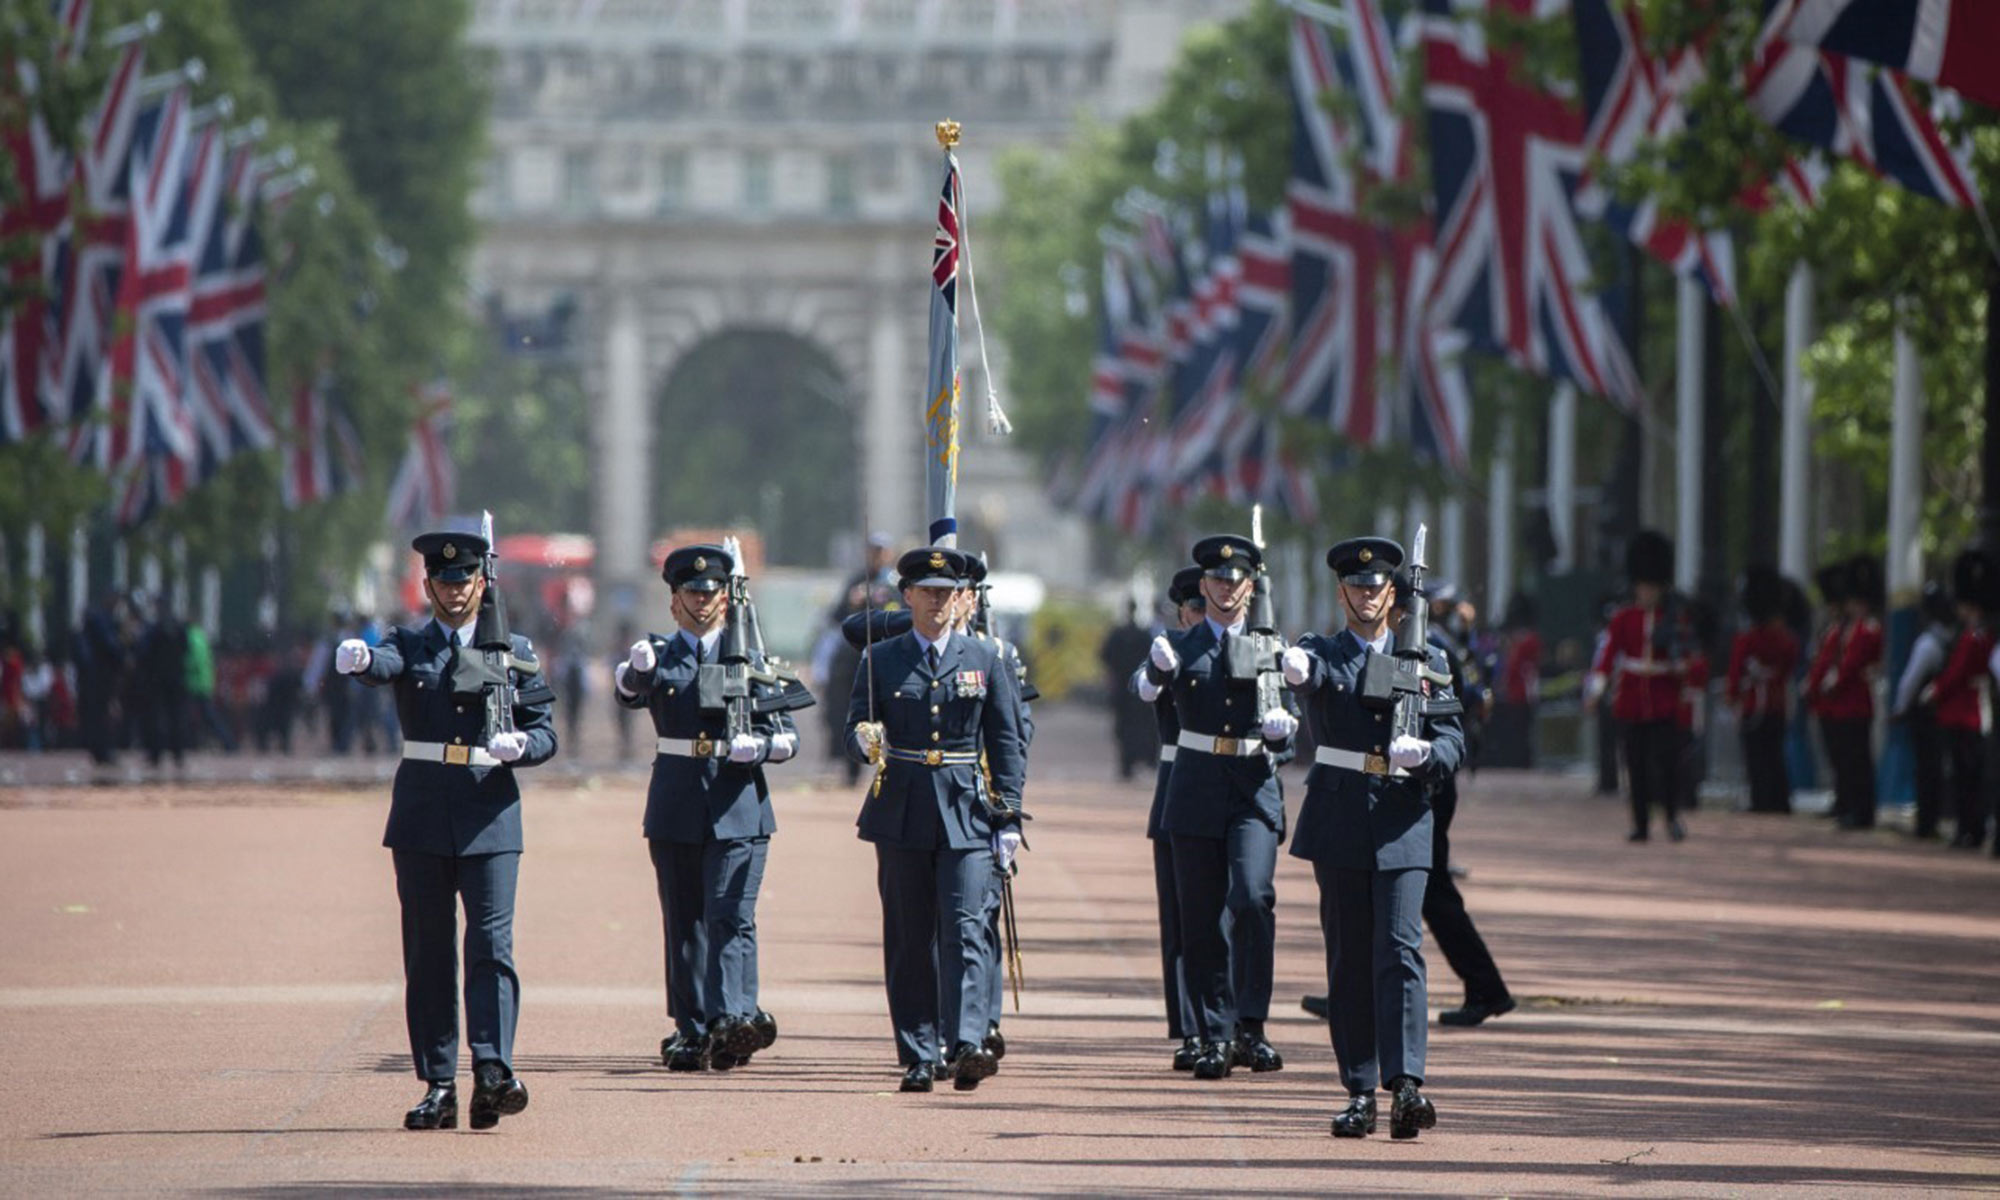 The Queen's Colour Squadron outside Buckingham Palace